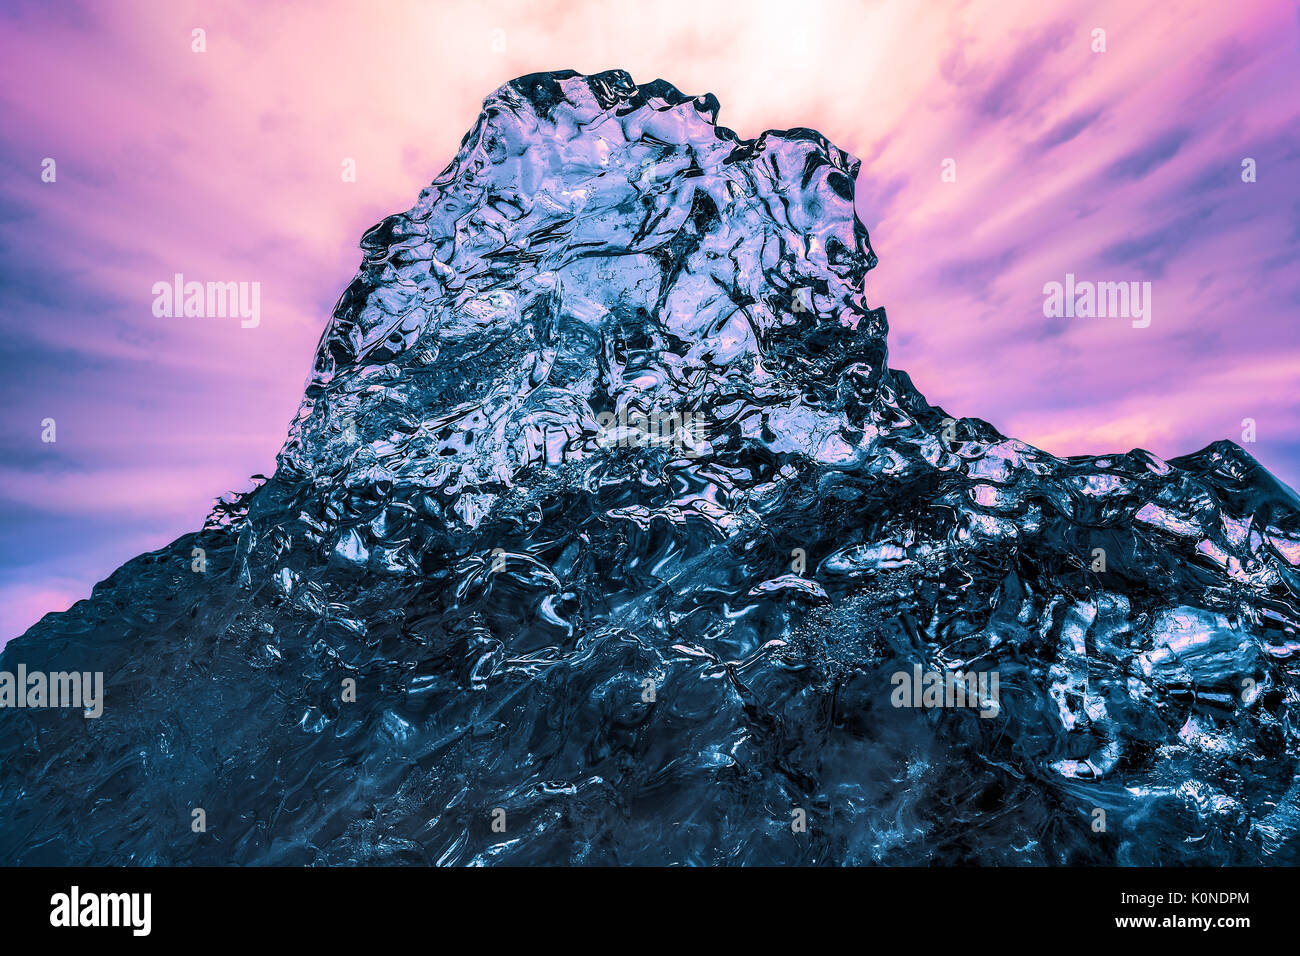 Abstract ice formation in Iceland Stock Photo